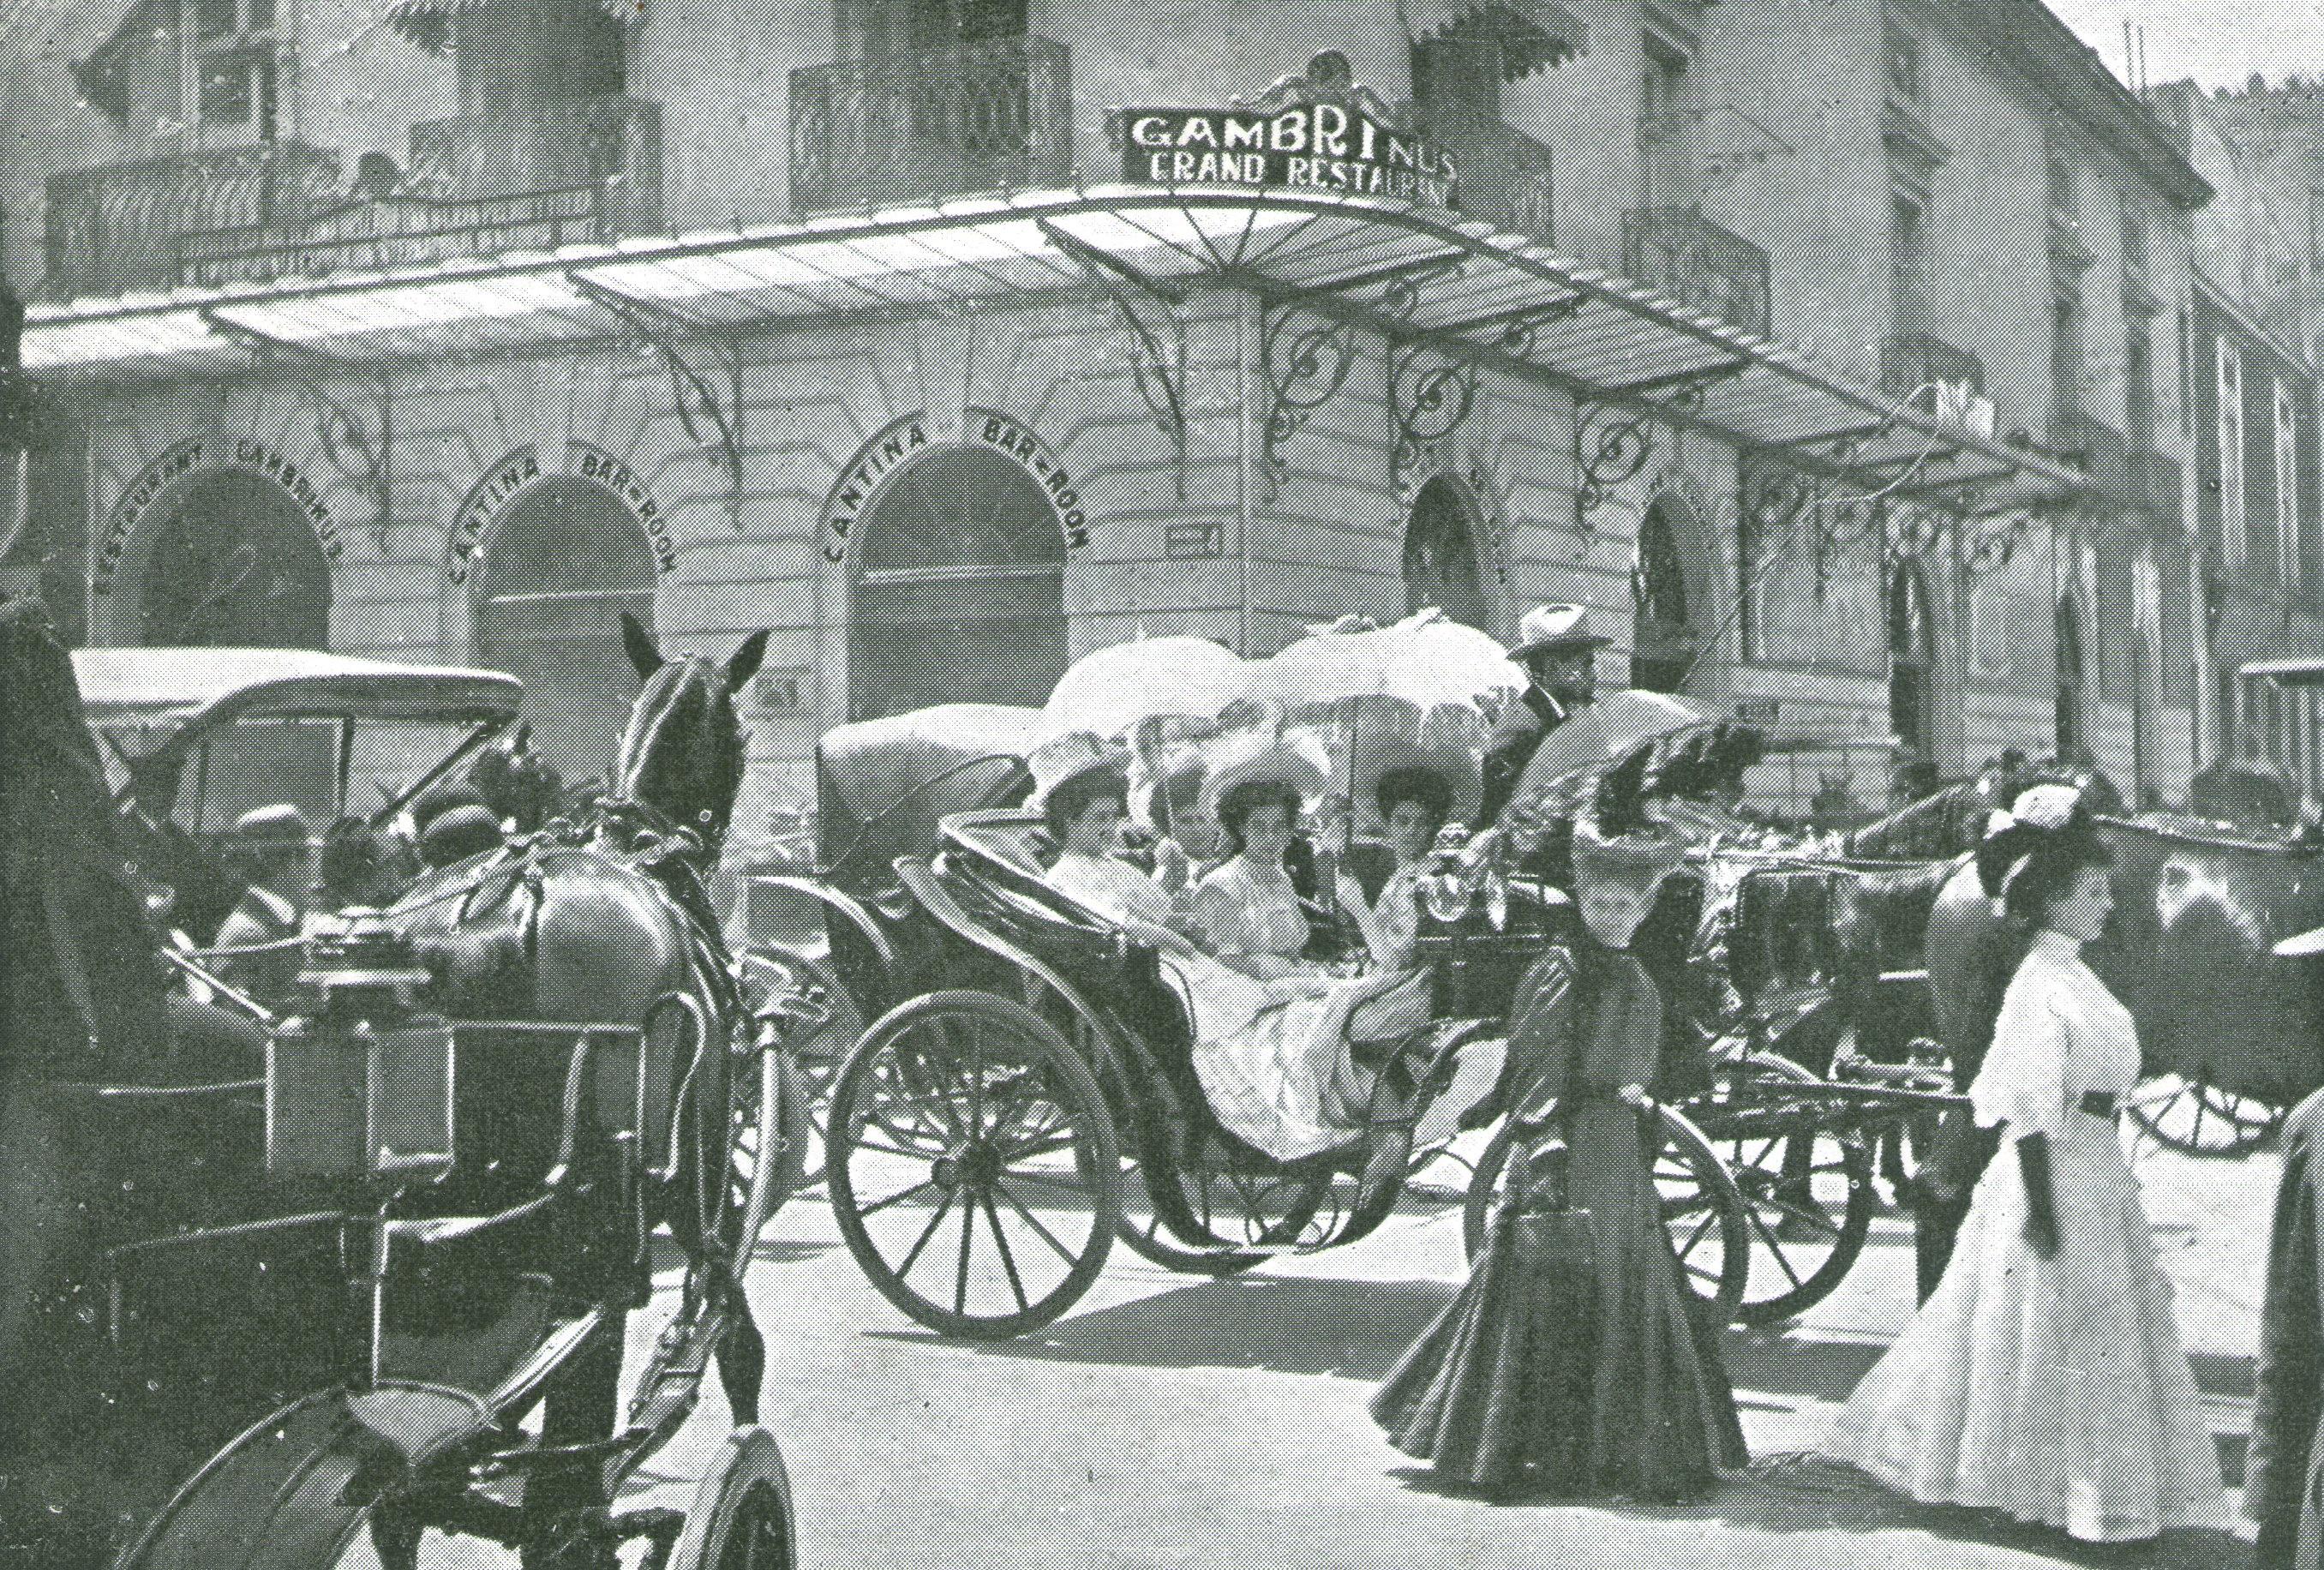 Ladies in horse carriage pass by the front ot the Restaurant Gambrinus. Others walk past them. Mexico, City, Mexico, Circa 1900-10s.jpeg